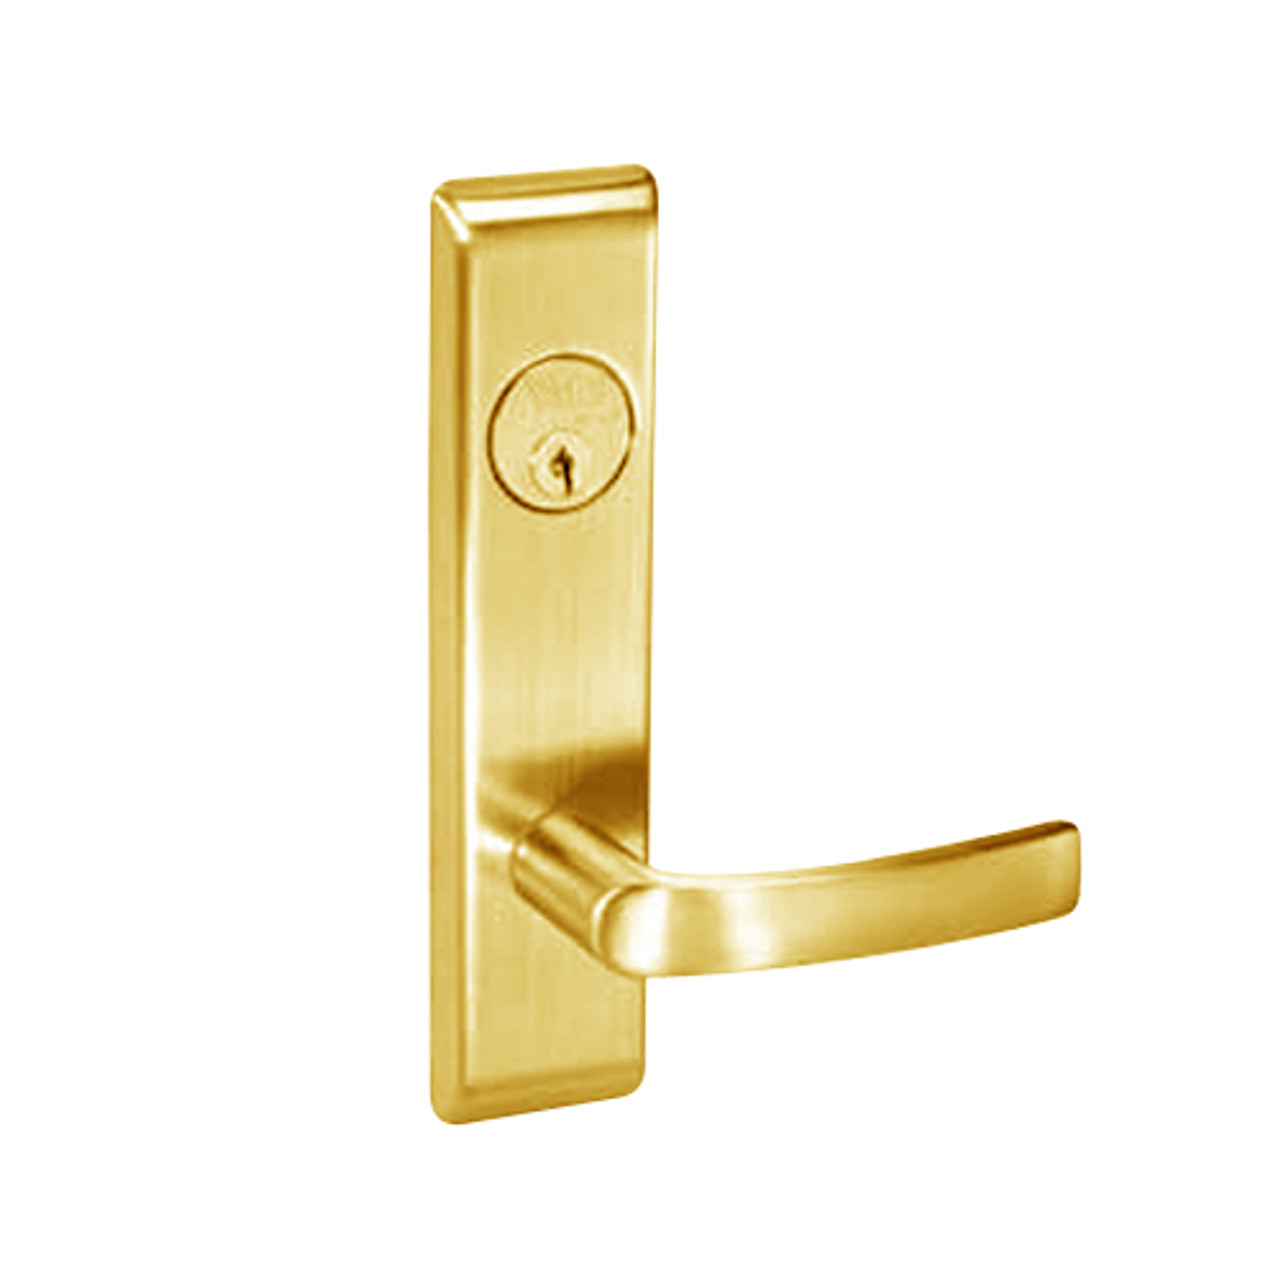 MOCN8822FL-605 Yale 8800FL Series Single Cylinder with Deadbolt Mortise Bathroom Lock with Indicator with Monroe Lever in Bright Brass